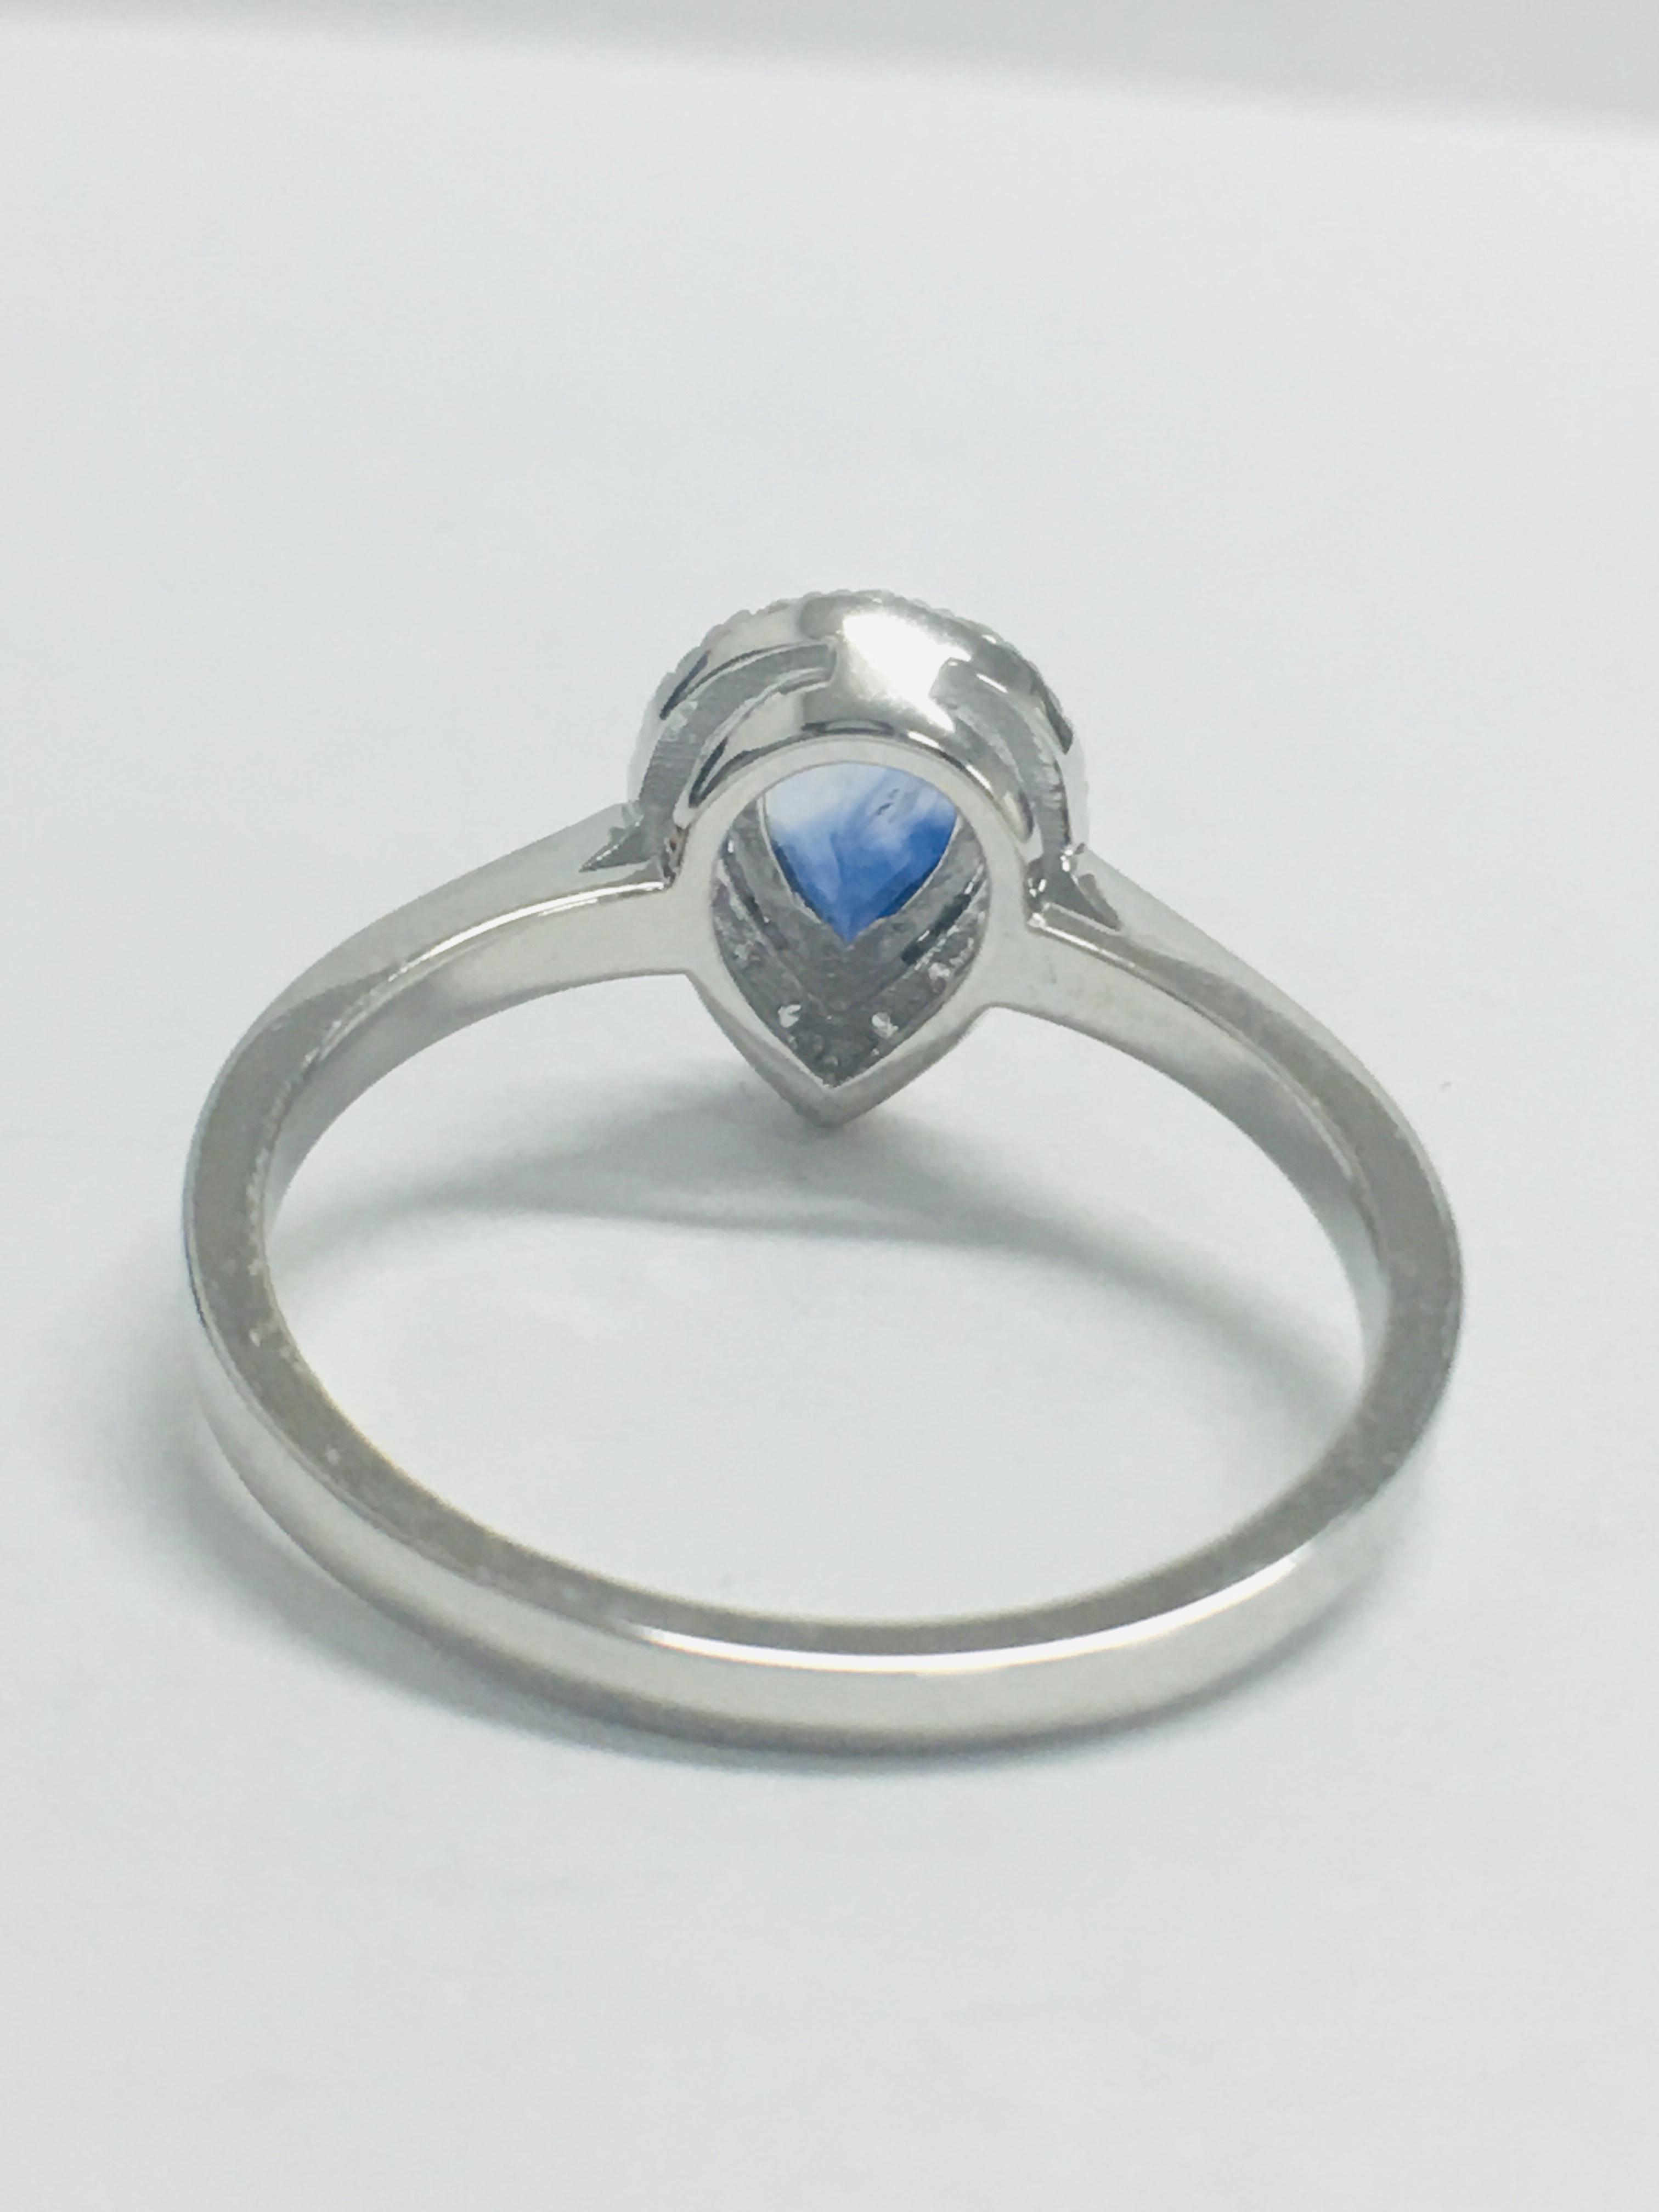 14Ct White Gold Sapphire And Diamond Ring. - Image 5 of 10